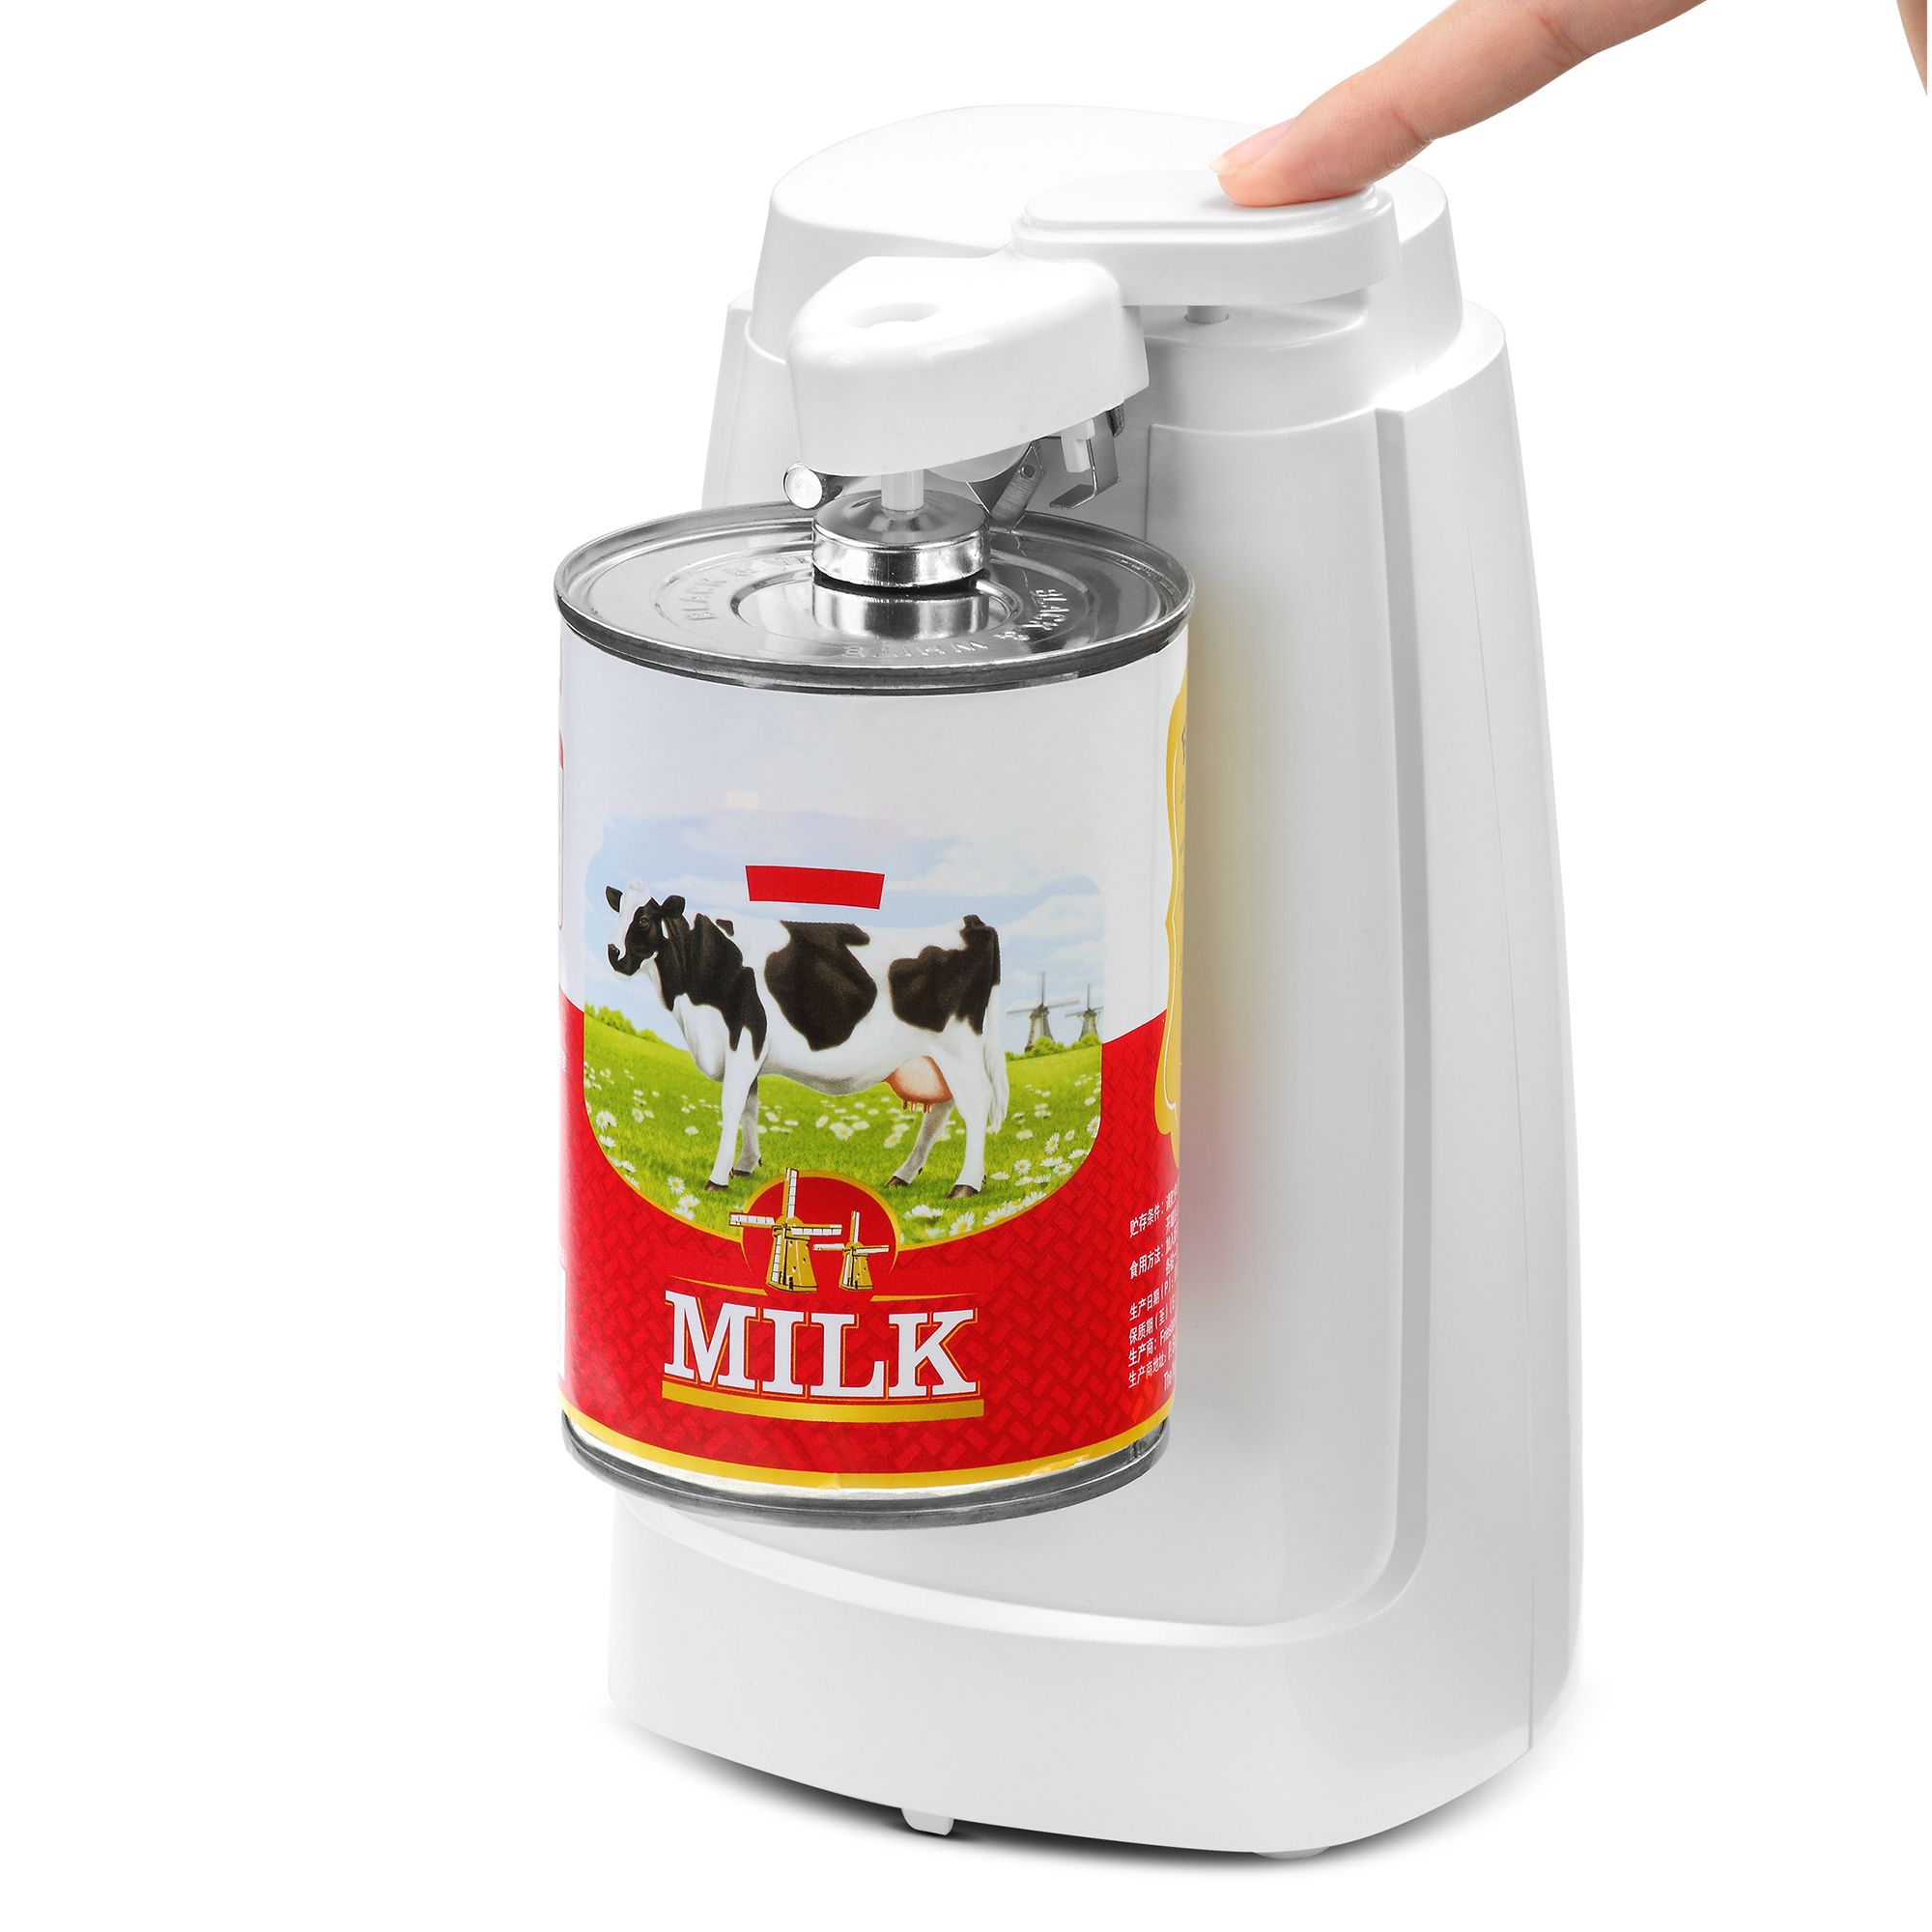 Extra-Tall Can Opener (white) - Model 76370